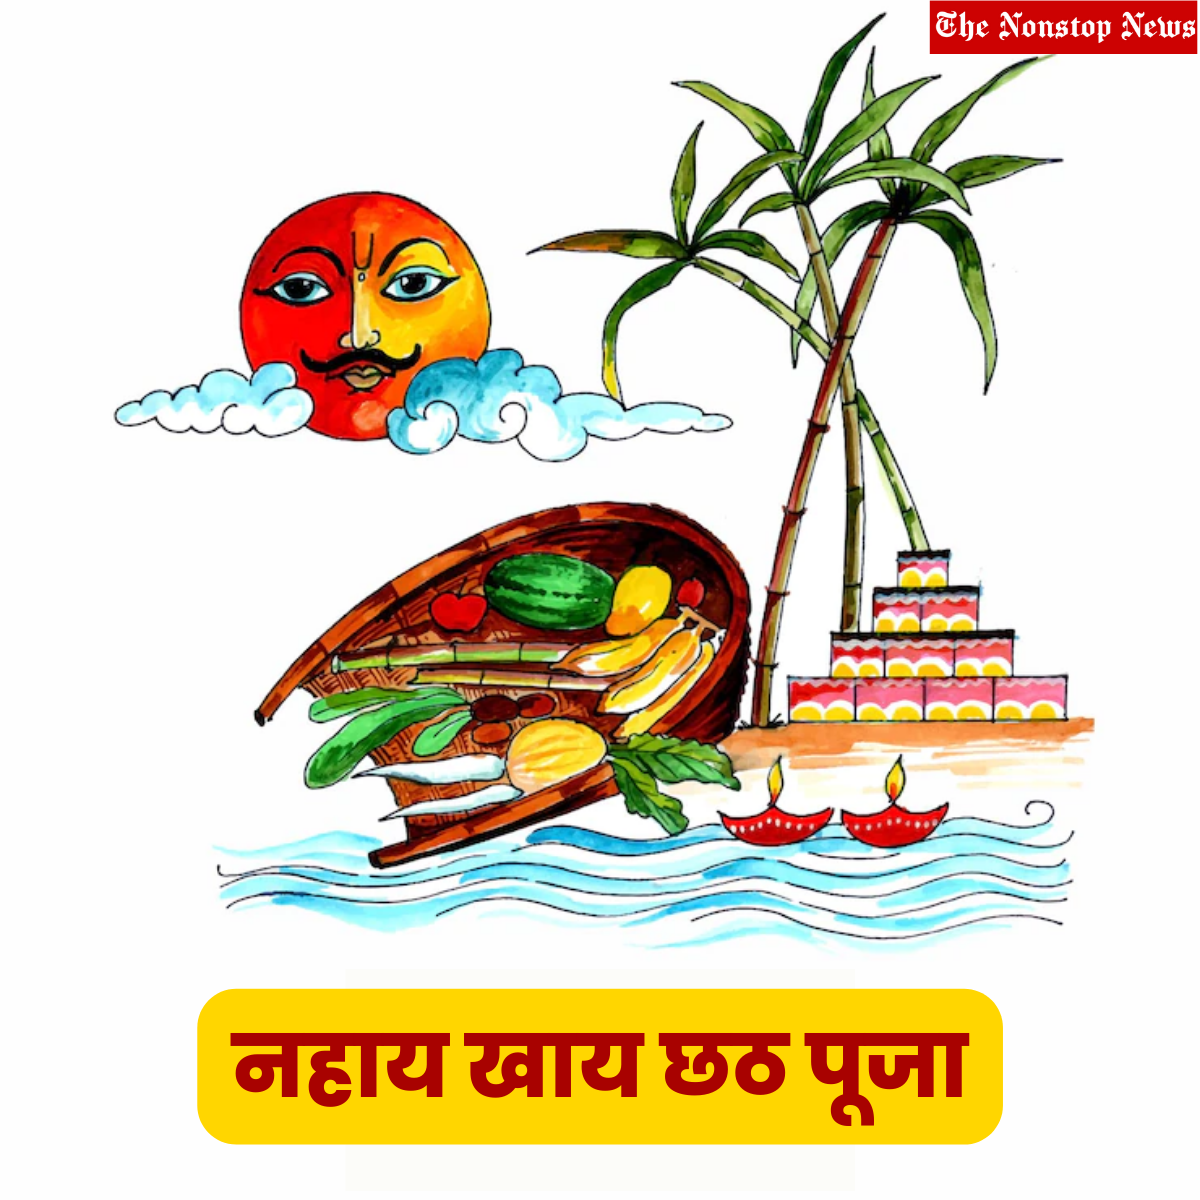 Nahay Khay Chhath Puja Quotes in Maithli 2022: Greetings, Wishes, Quotes, Images, Messages, and Shayari